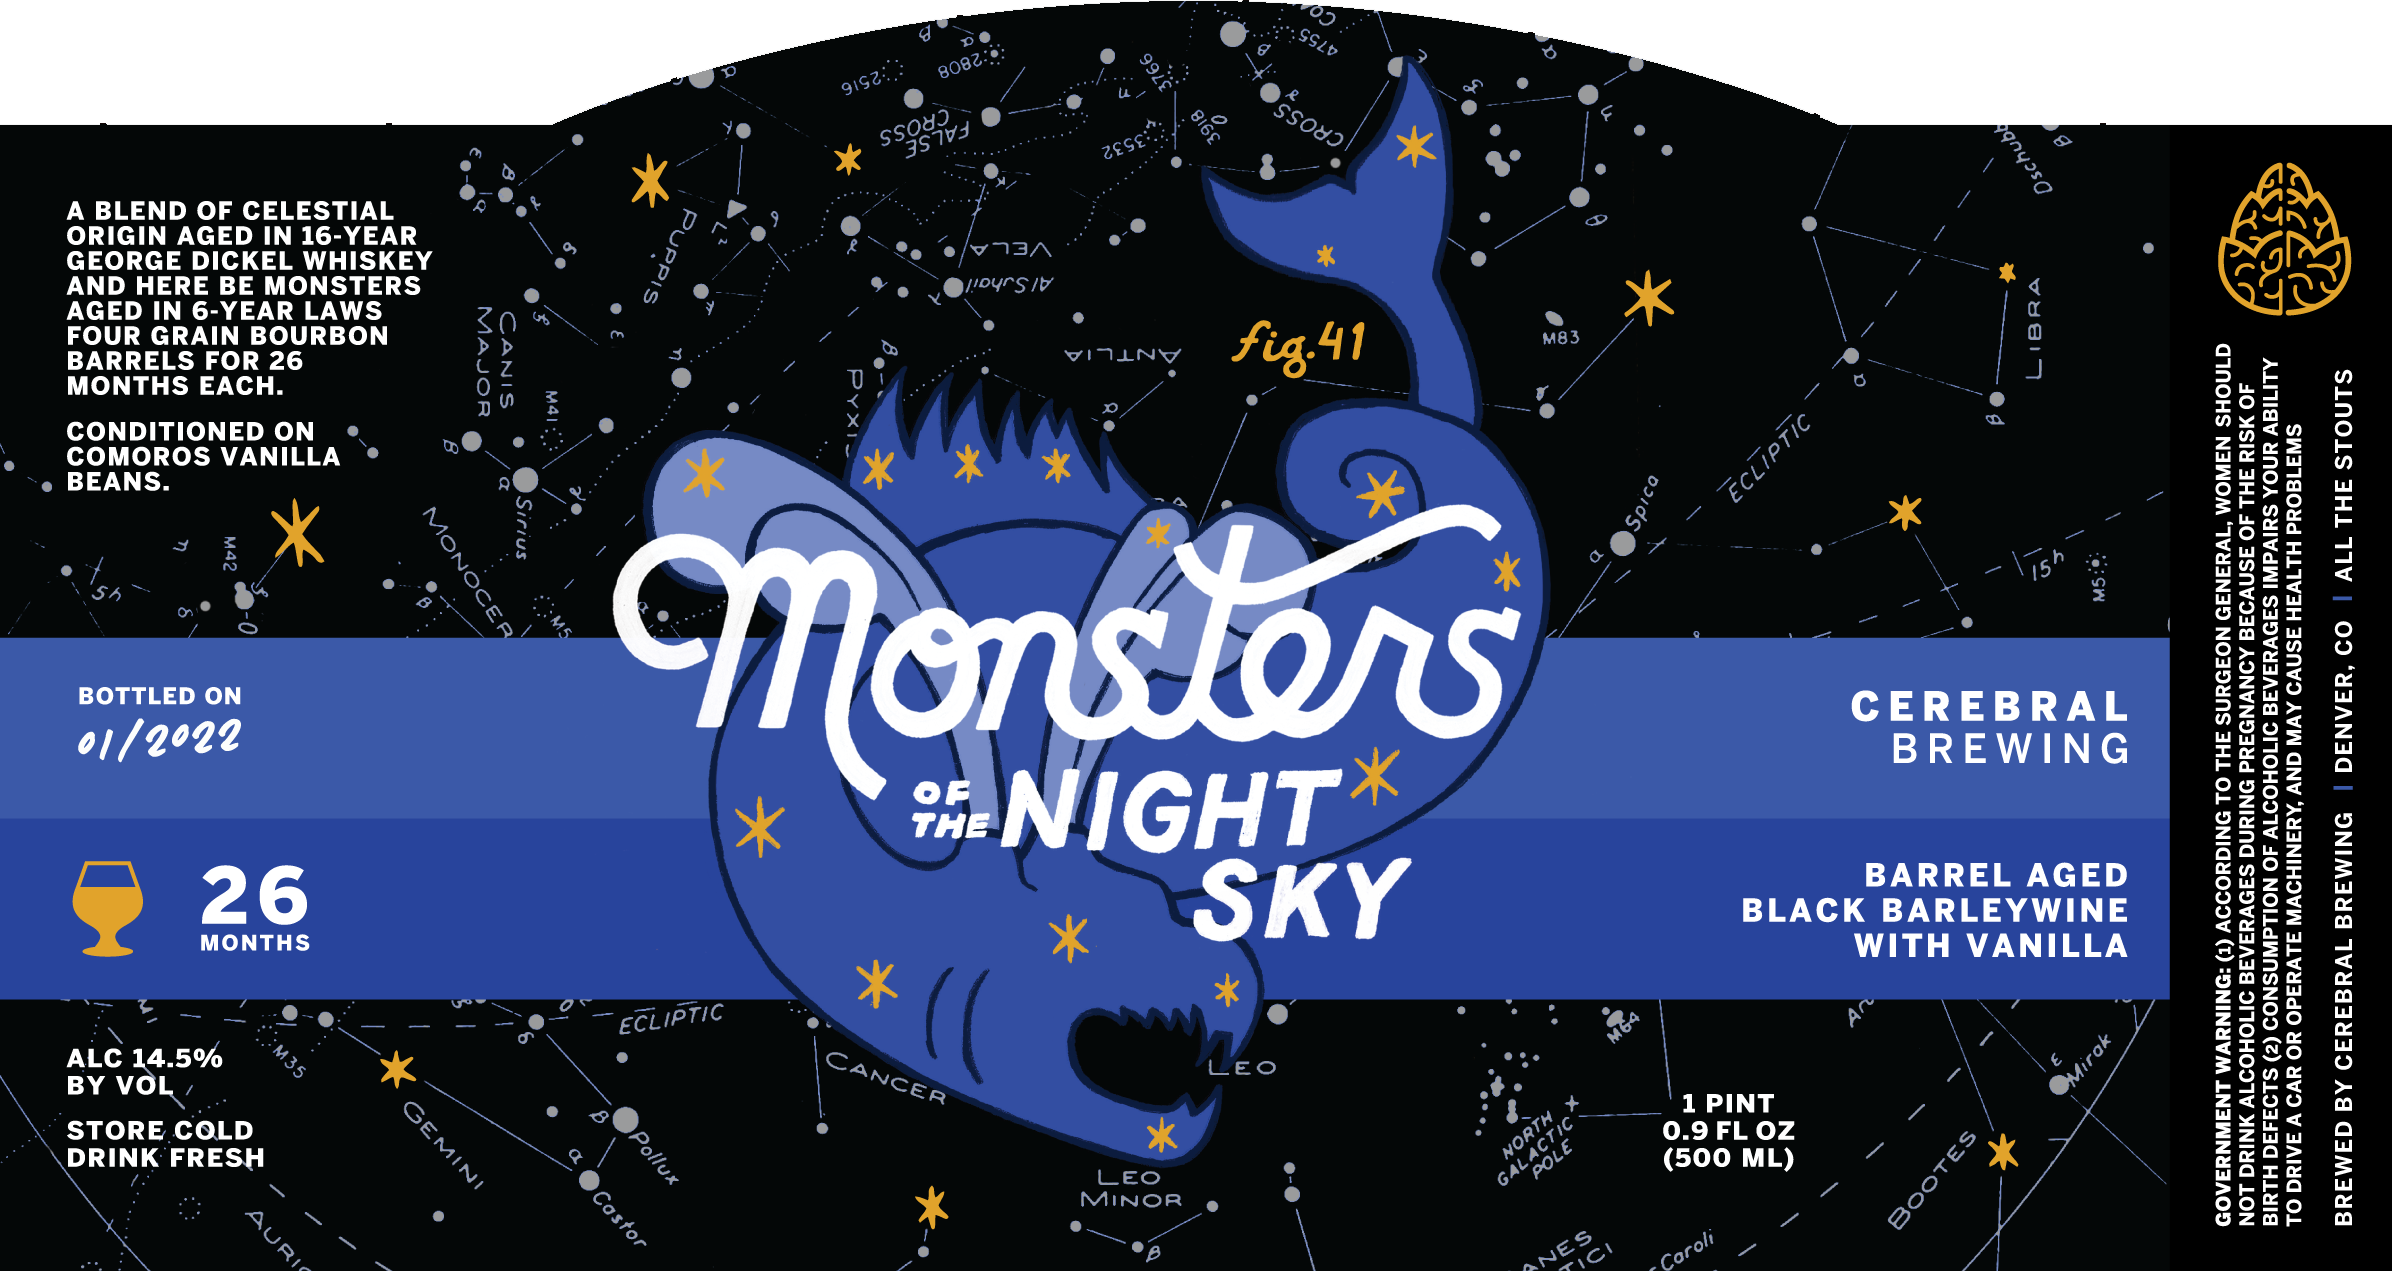 Label Image for Monsters of the Night Sky